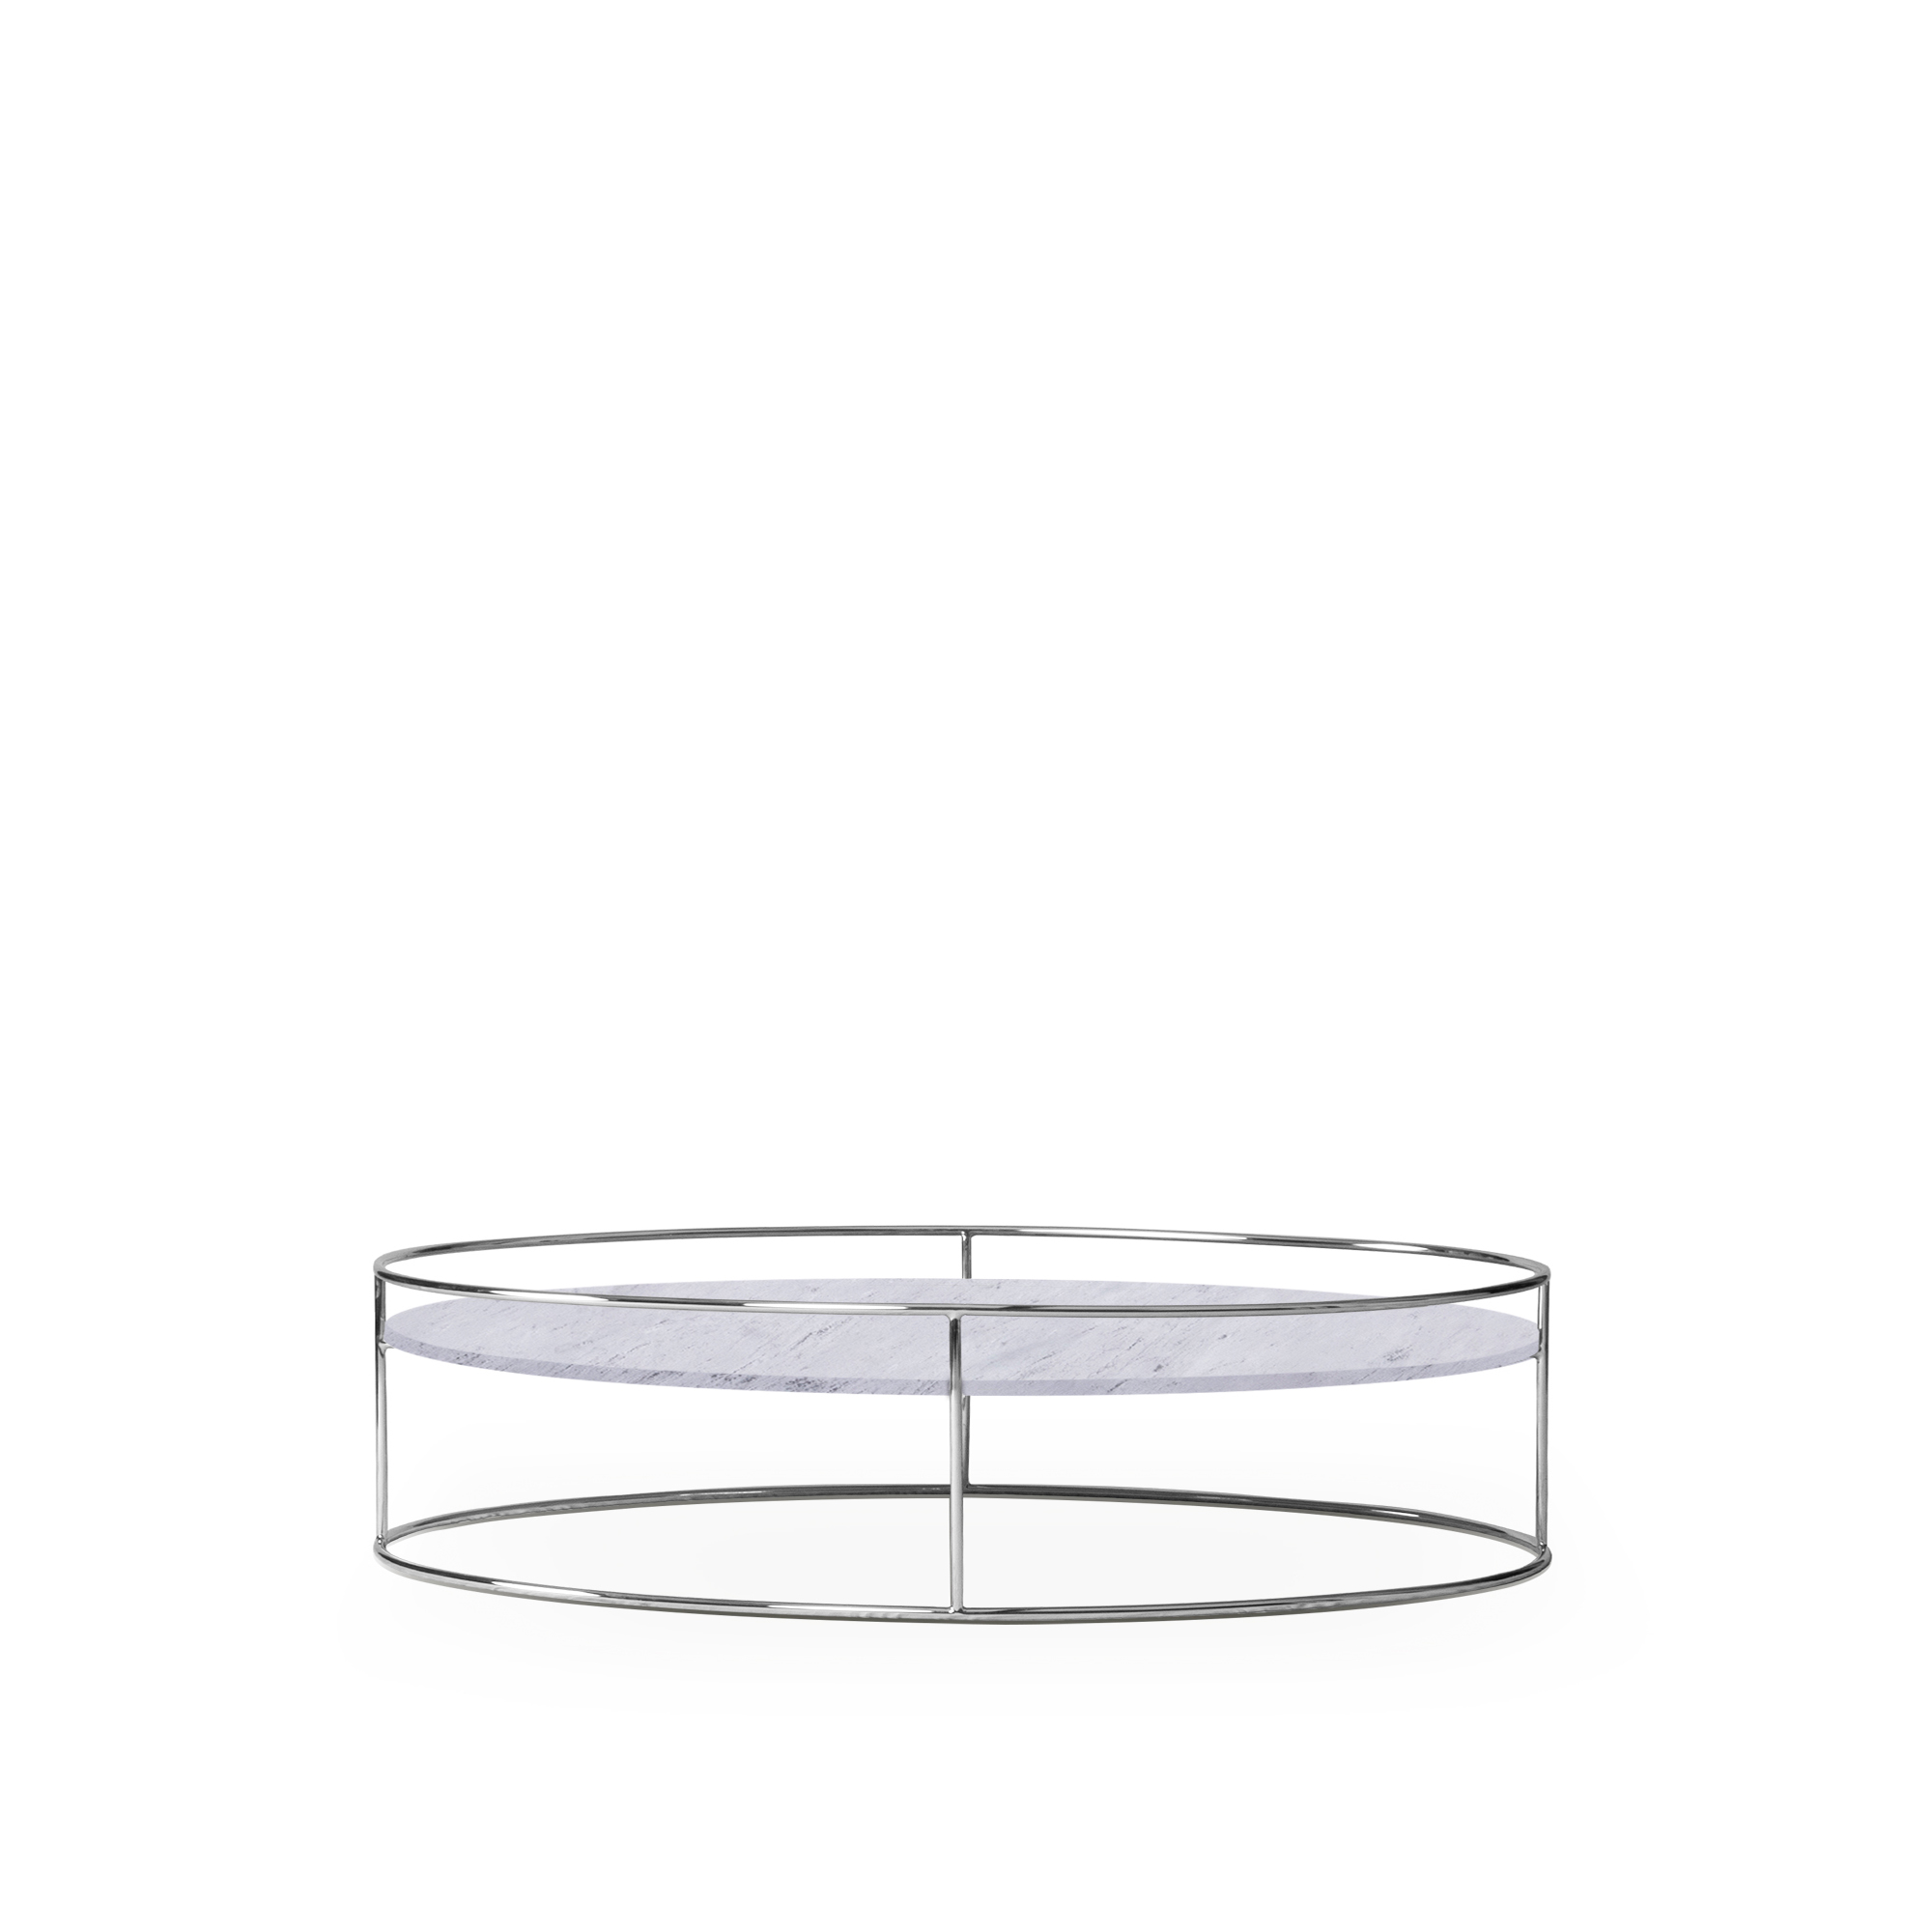 Gabo C 1 | Art Series | Decasa Marble Marble Dining Table